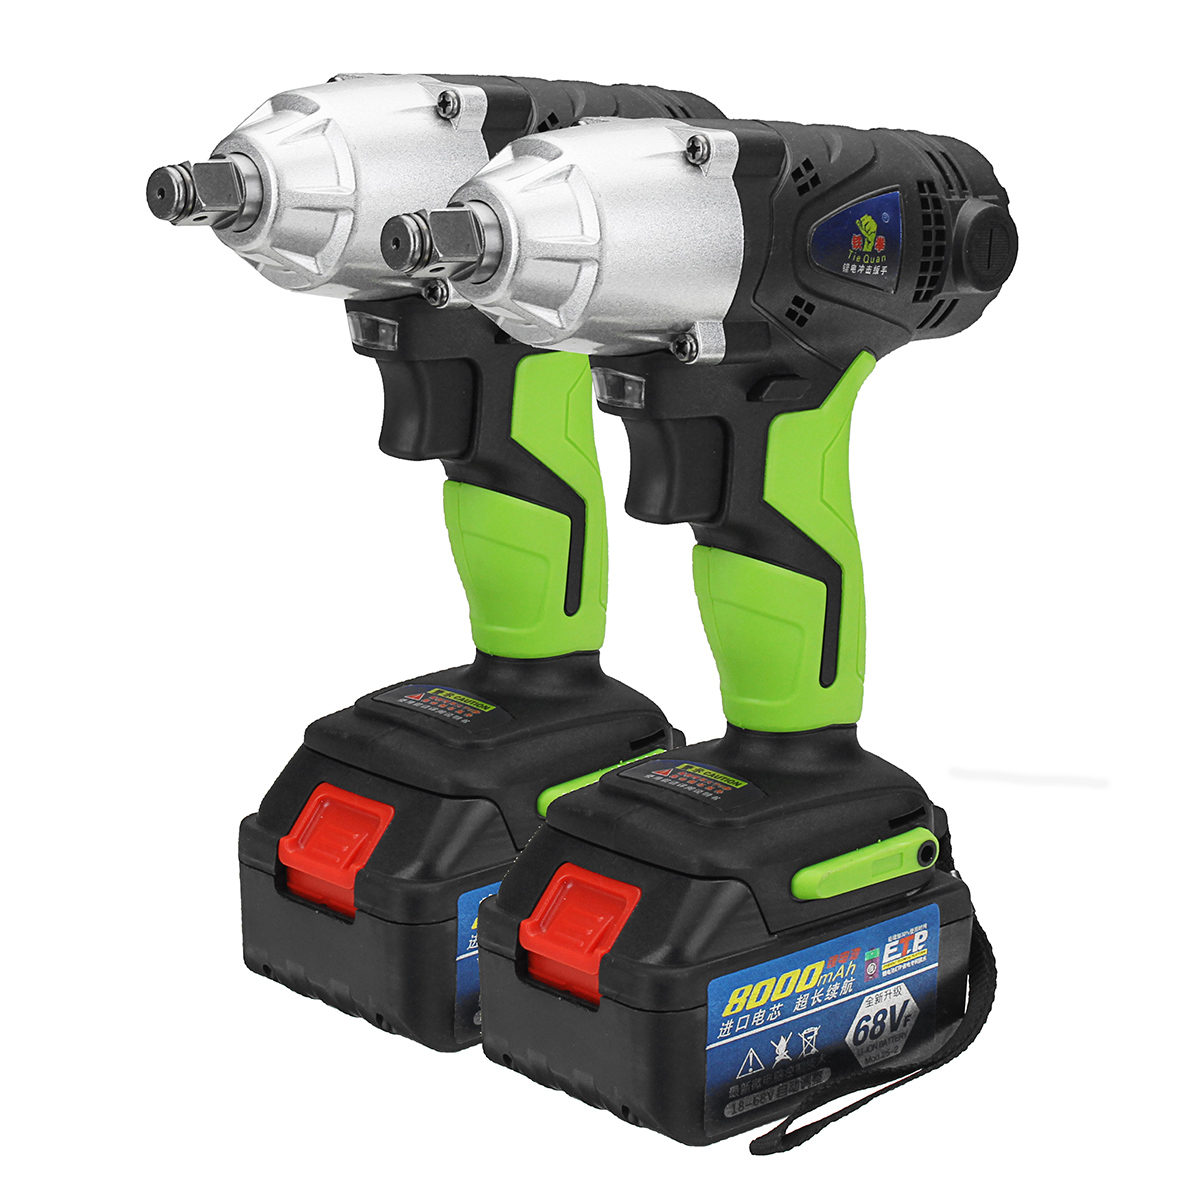 80Ah-68V-Cordless-Impact-Wrench-Li-ion-Power-Driver-Drill-Power-Wrench-Tools-1-Charger-2-Batteries-1286260-3